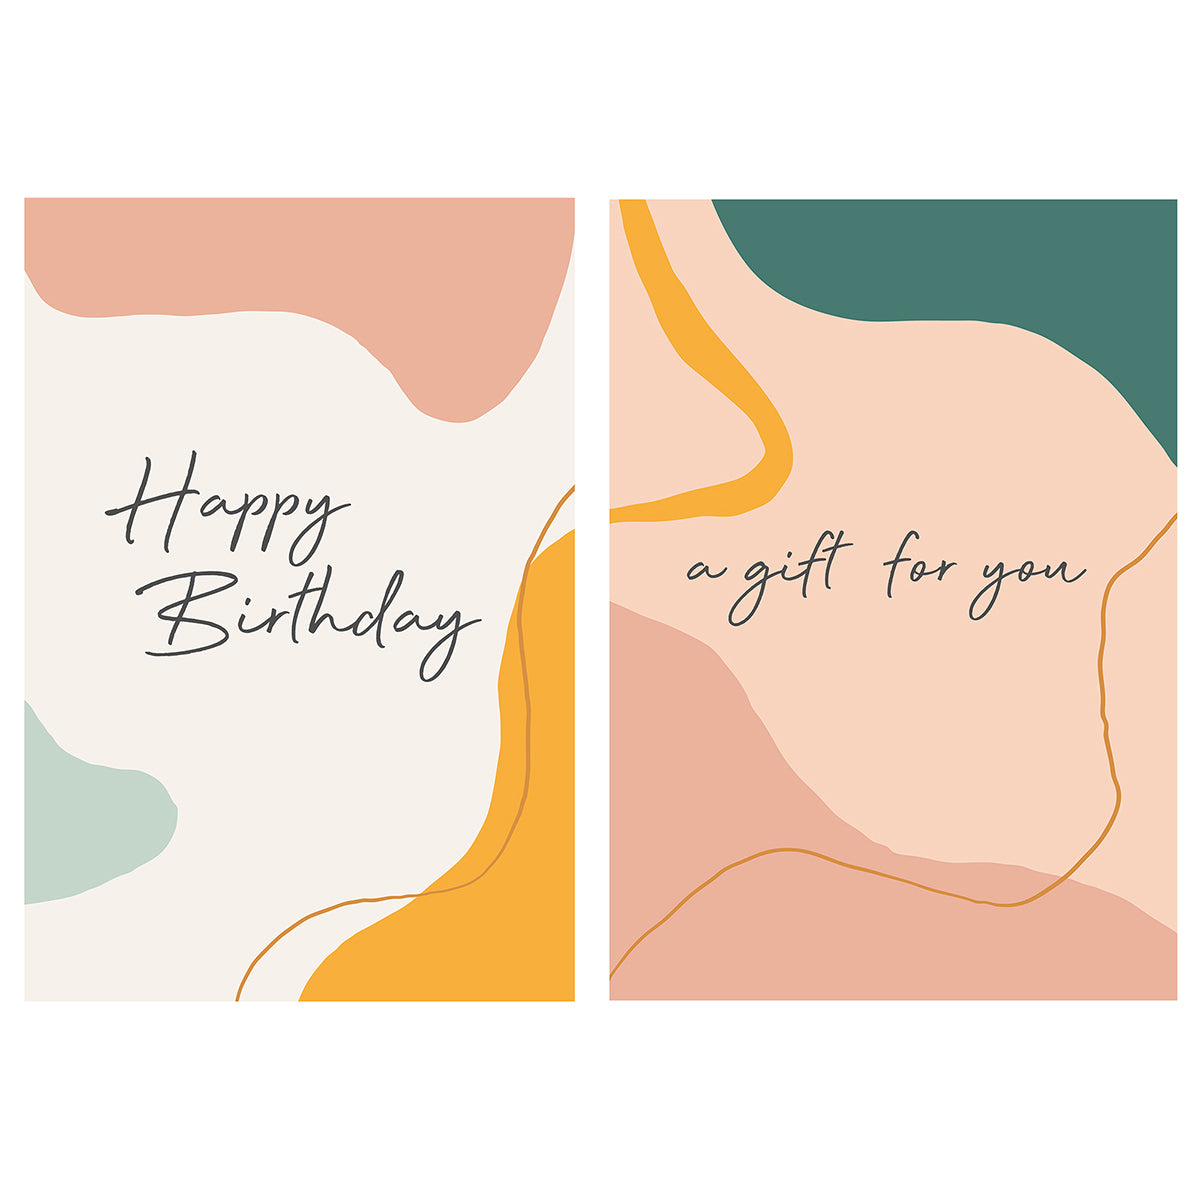 Two greeting cards with abstract pastel designs; the left card says "Happy Birthday" and the right card says "a gift for you" in cursive handwriting.